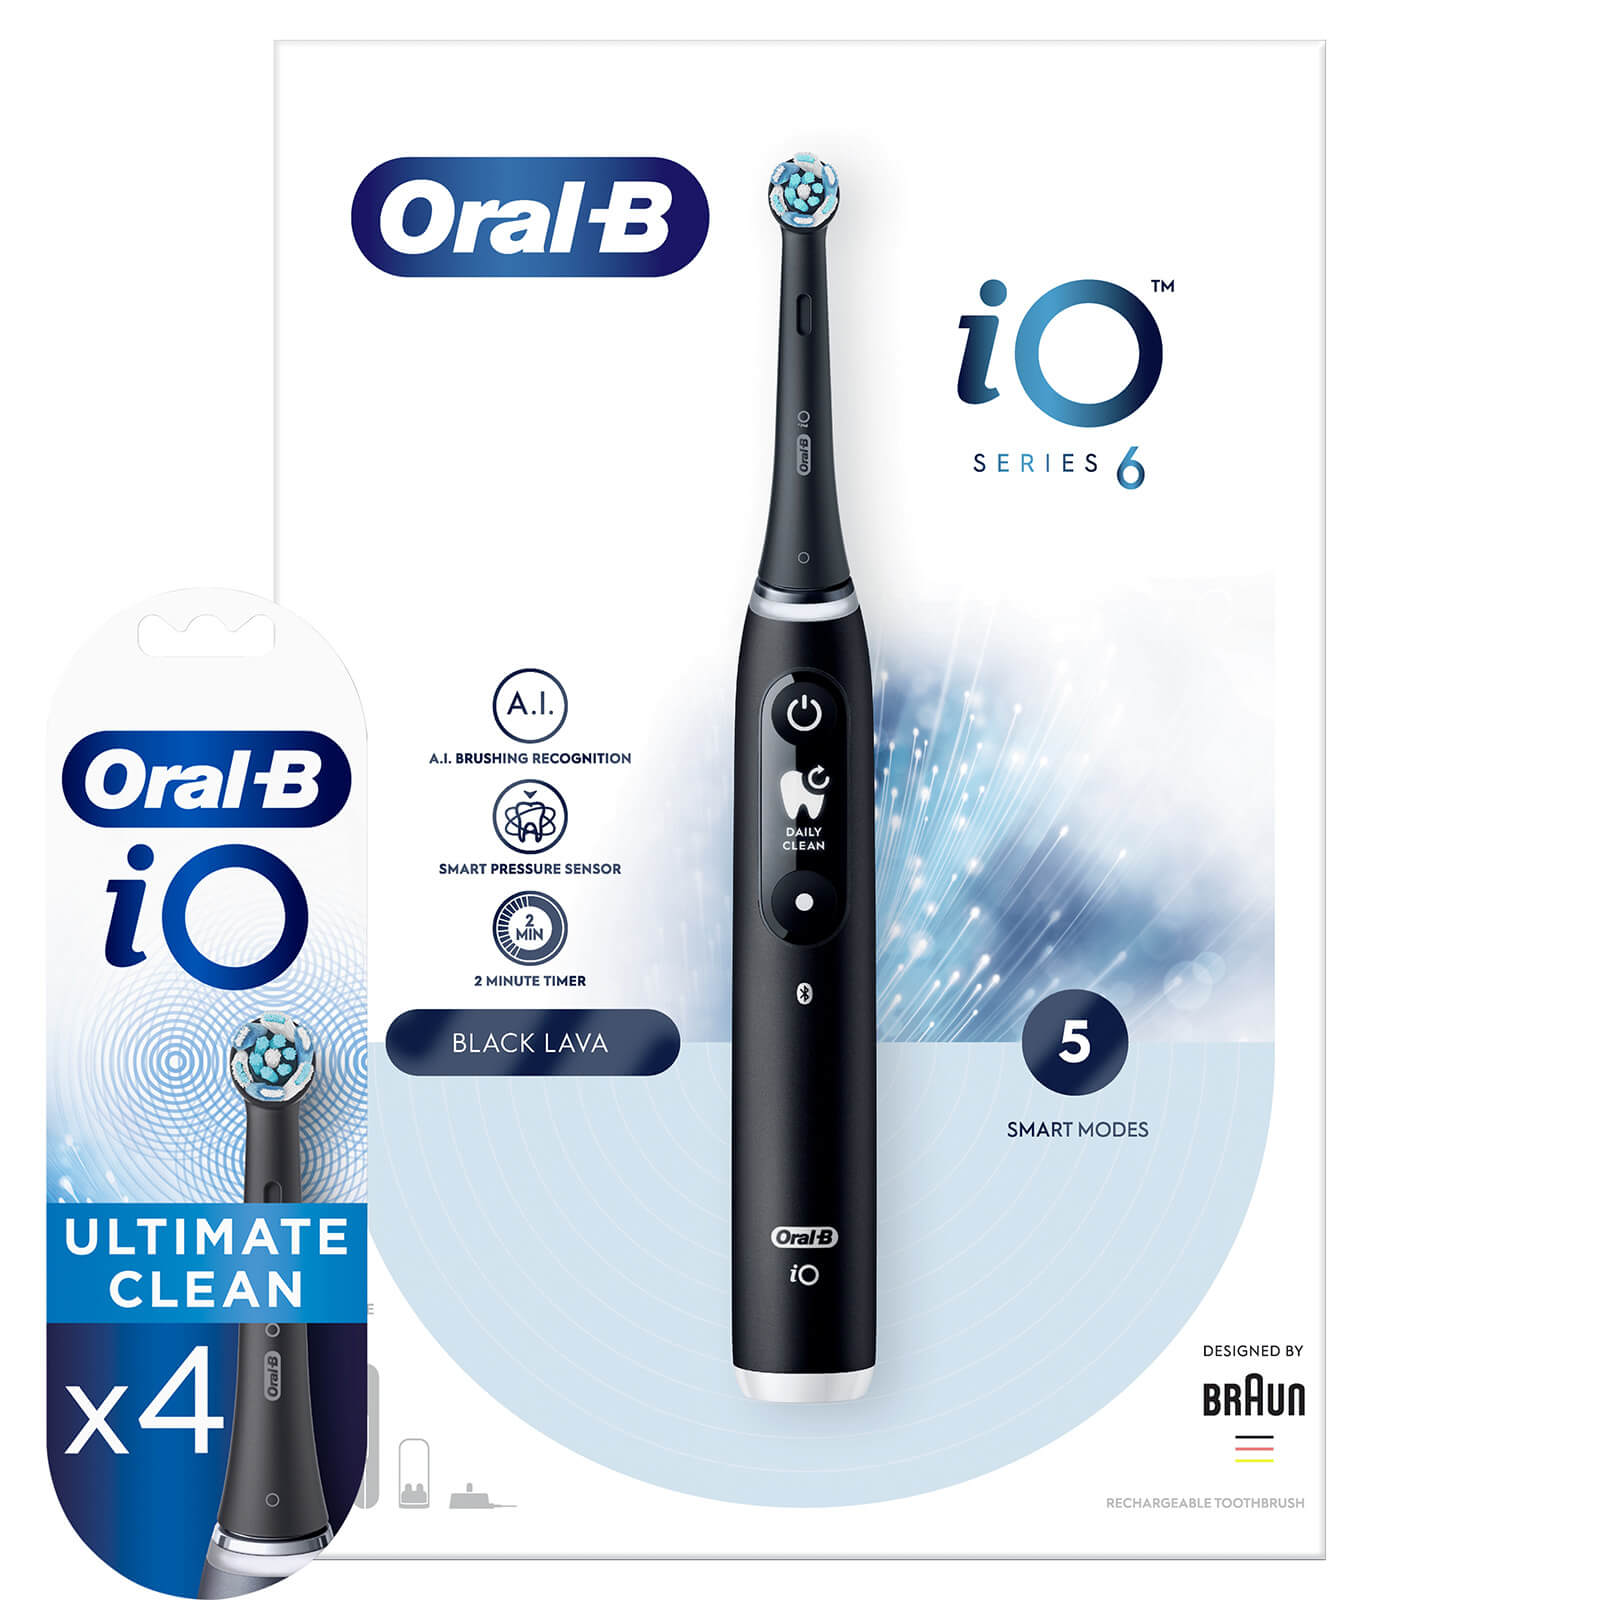 Oral B iO6 Black Lava Electric Toothbrush with Travel Case - Toothbrush + 4 Refills